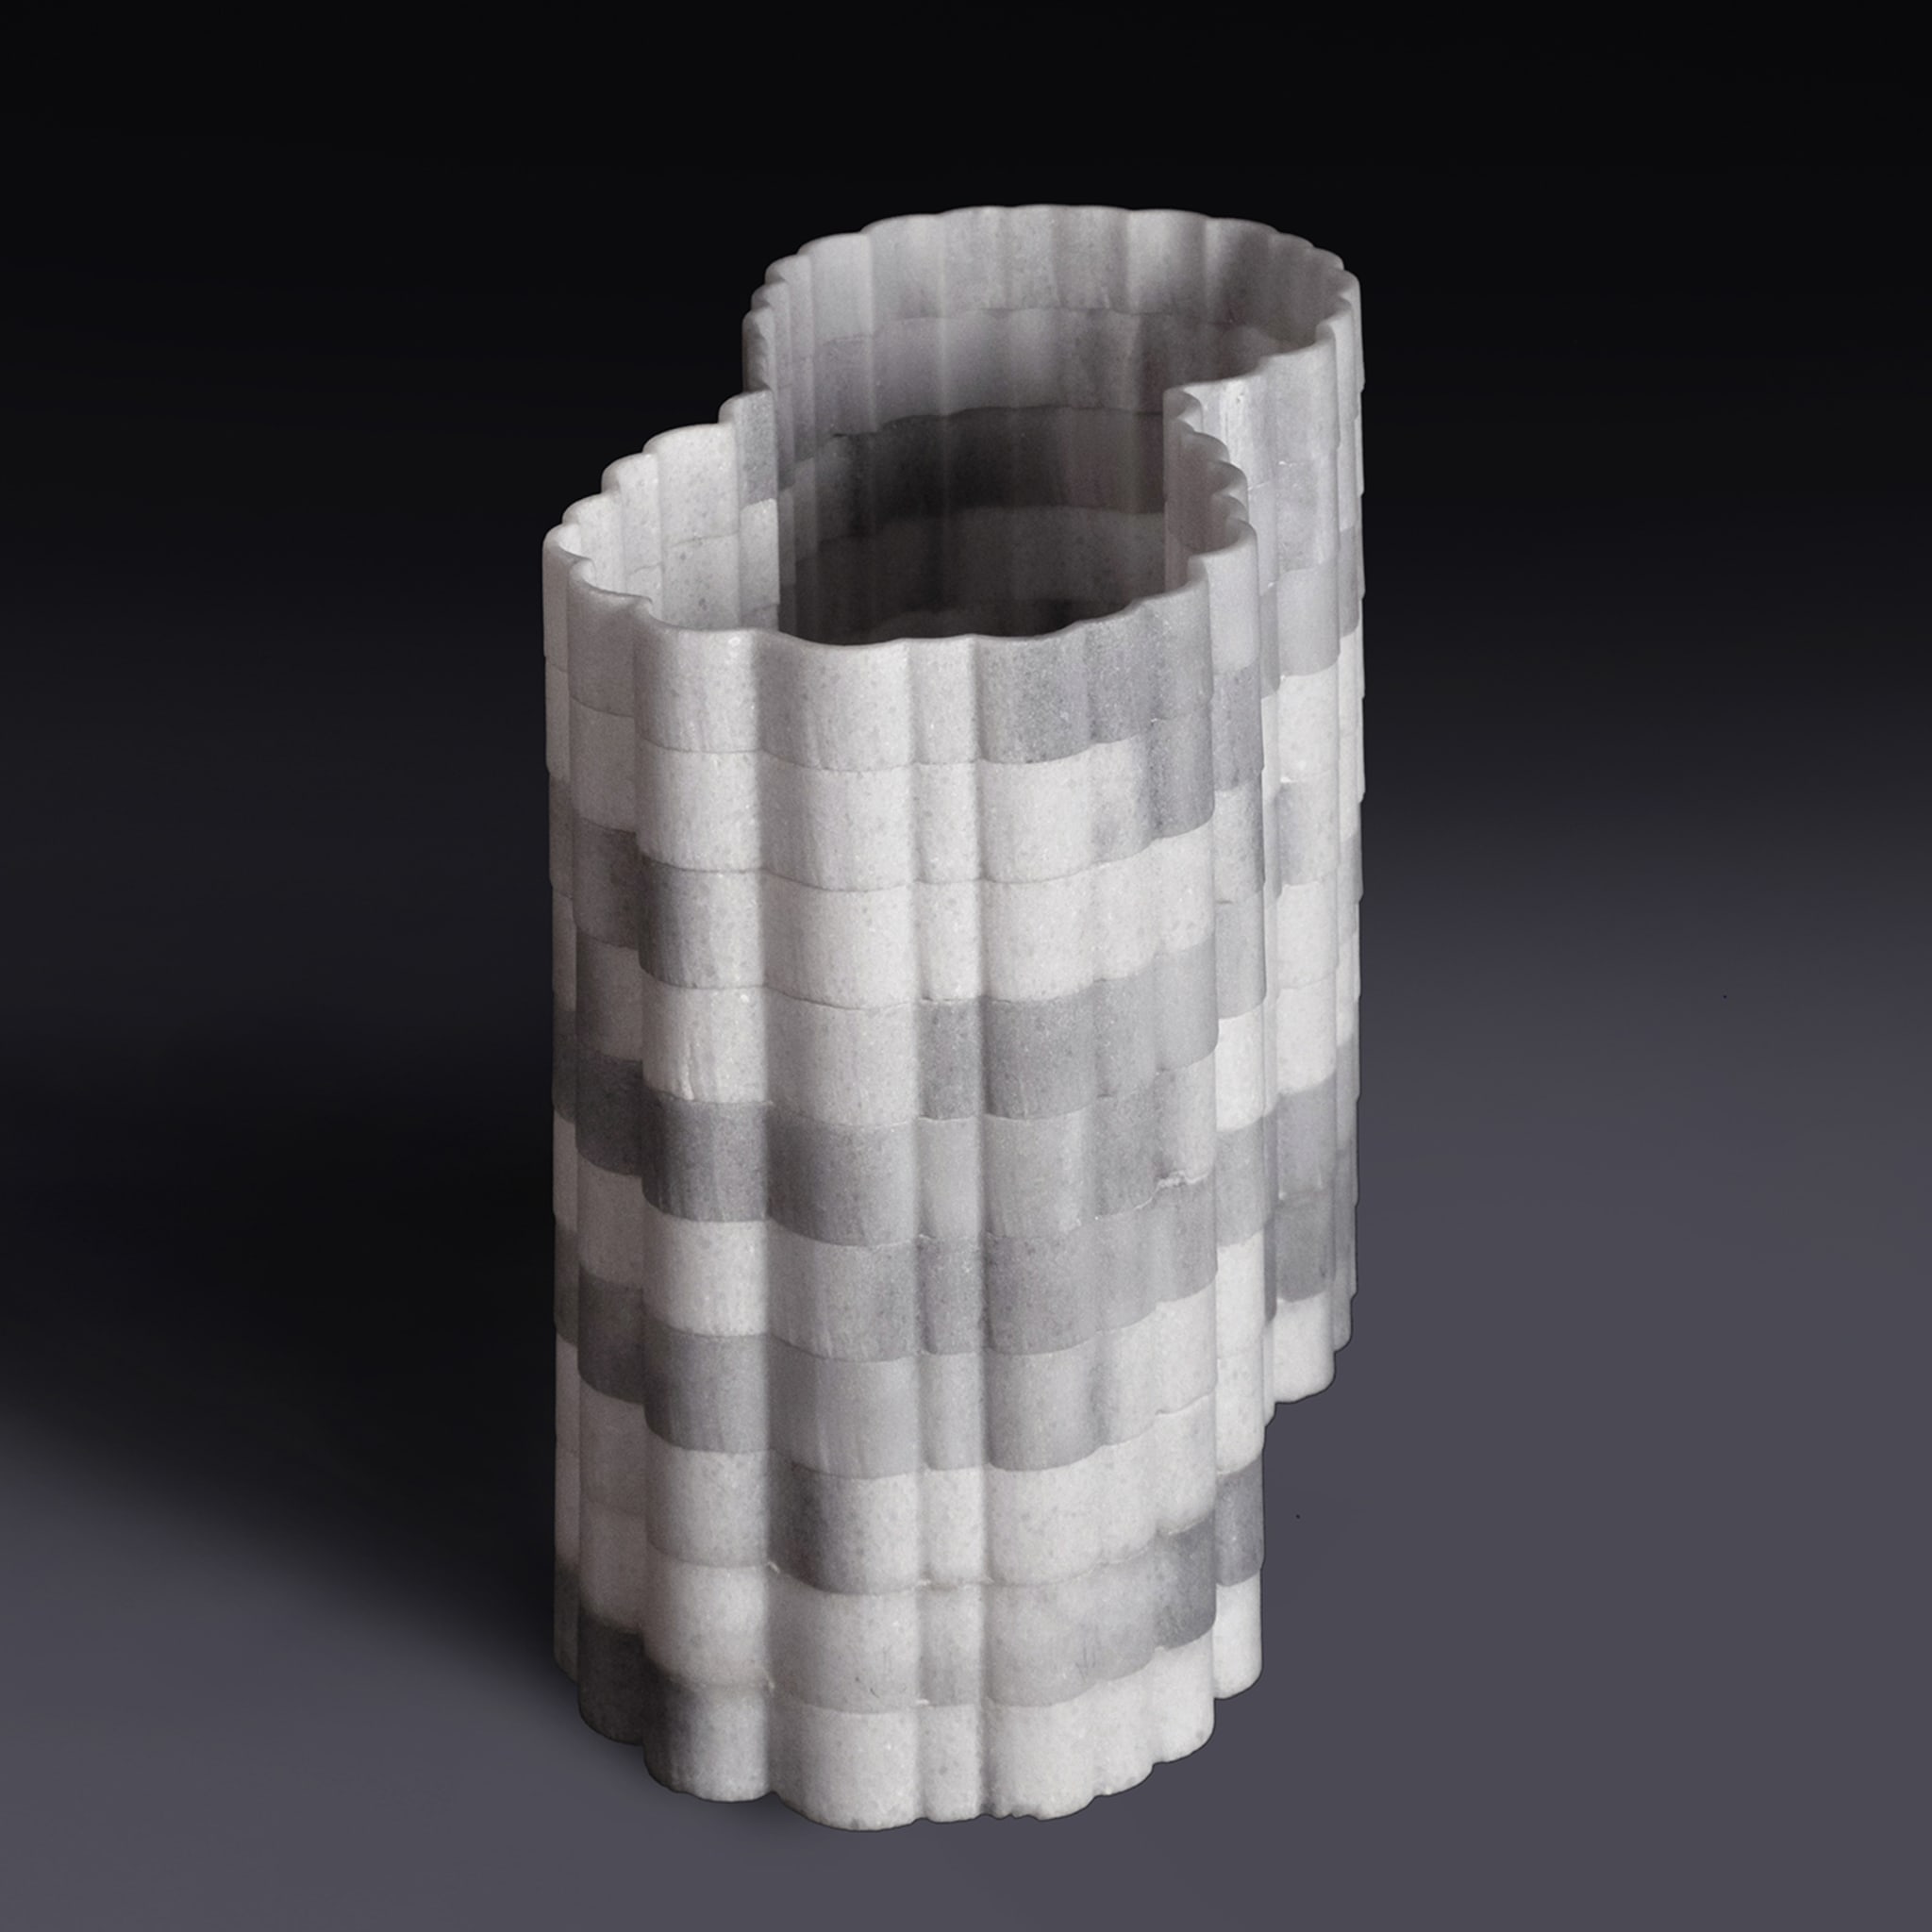 Stripes Vase Olimpic White Marble #2 by Paolo Ulian - Alternative view 4